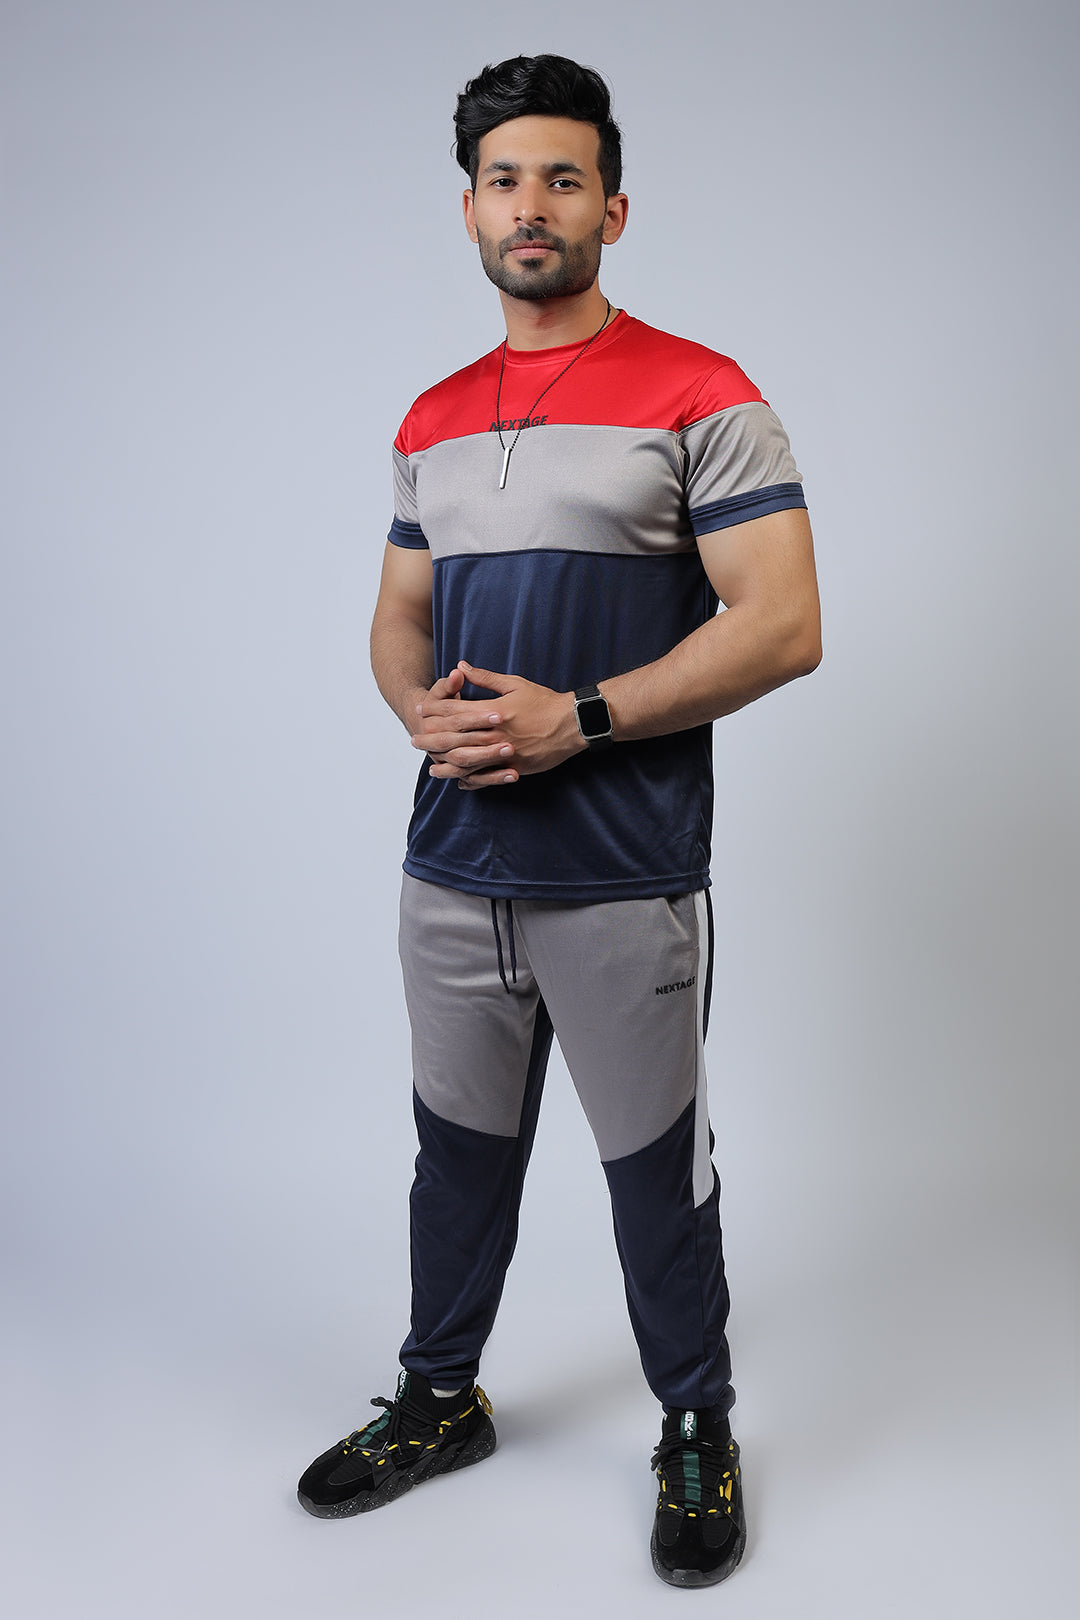 Nextage Summer Activewear Track suits for mens,